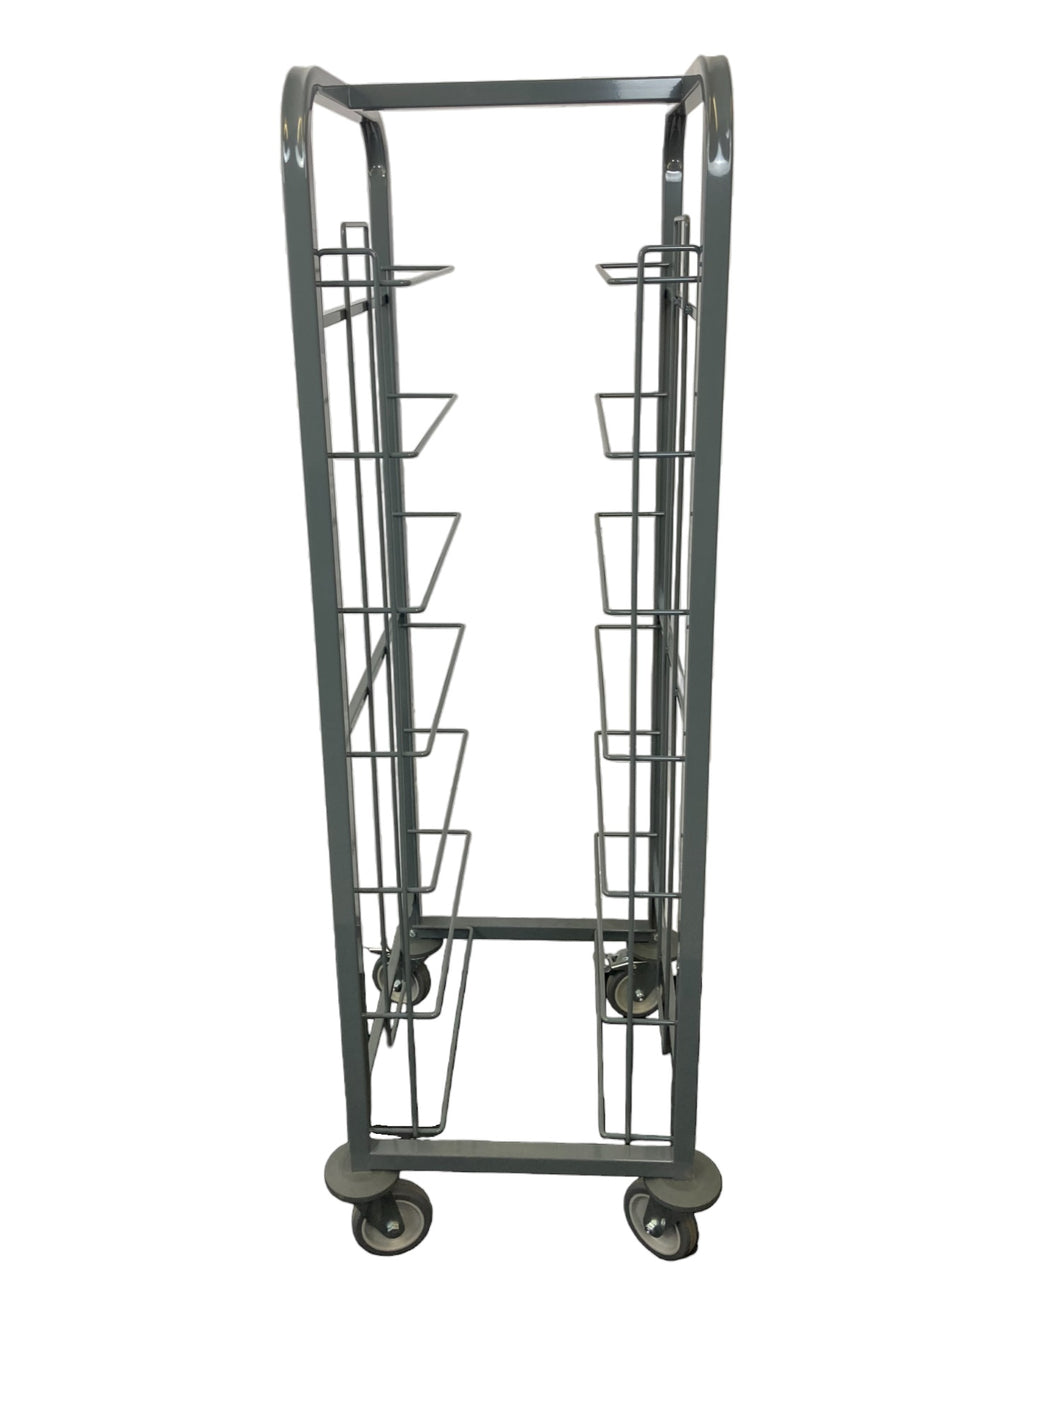 Fully Welded 7 Level Clearing Trolley